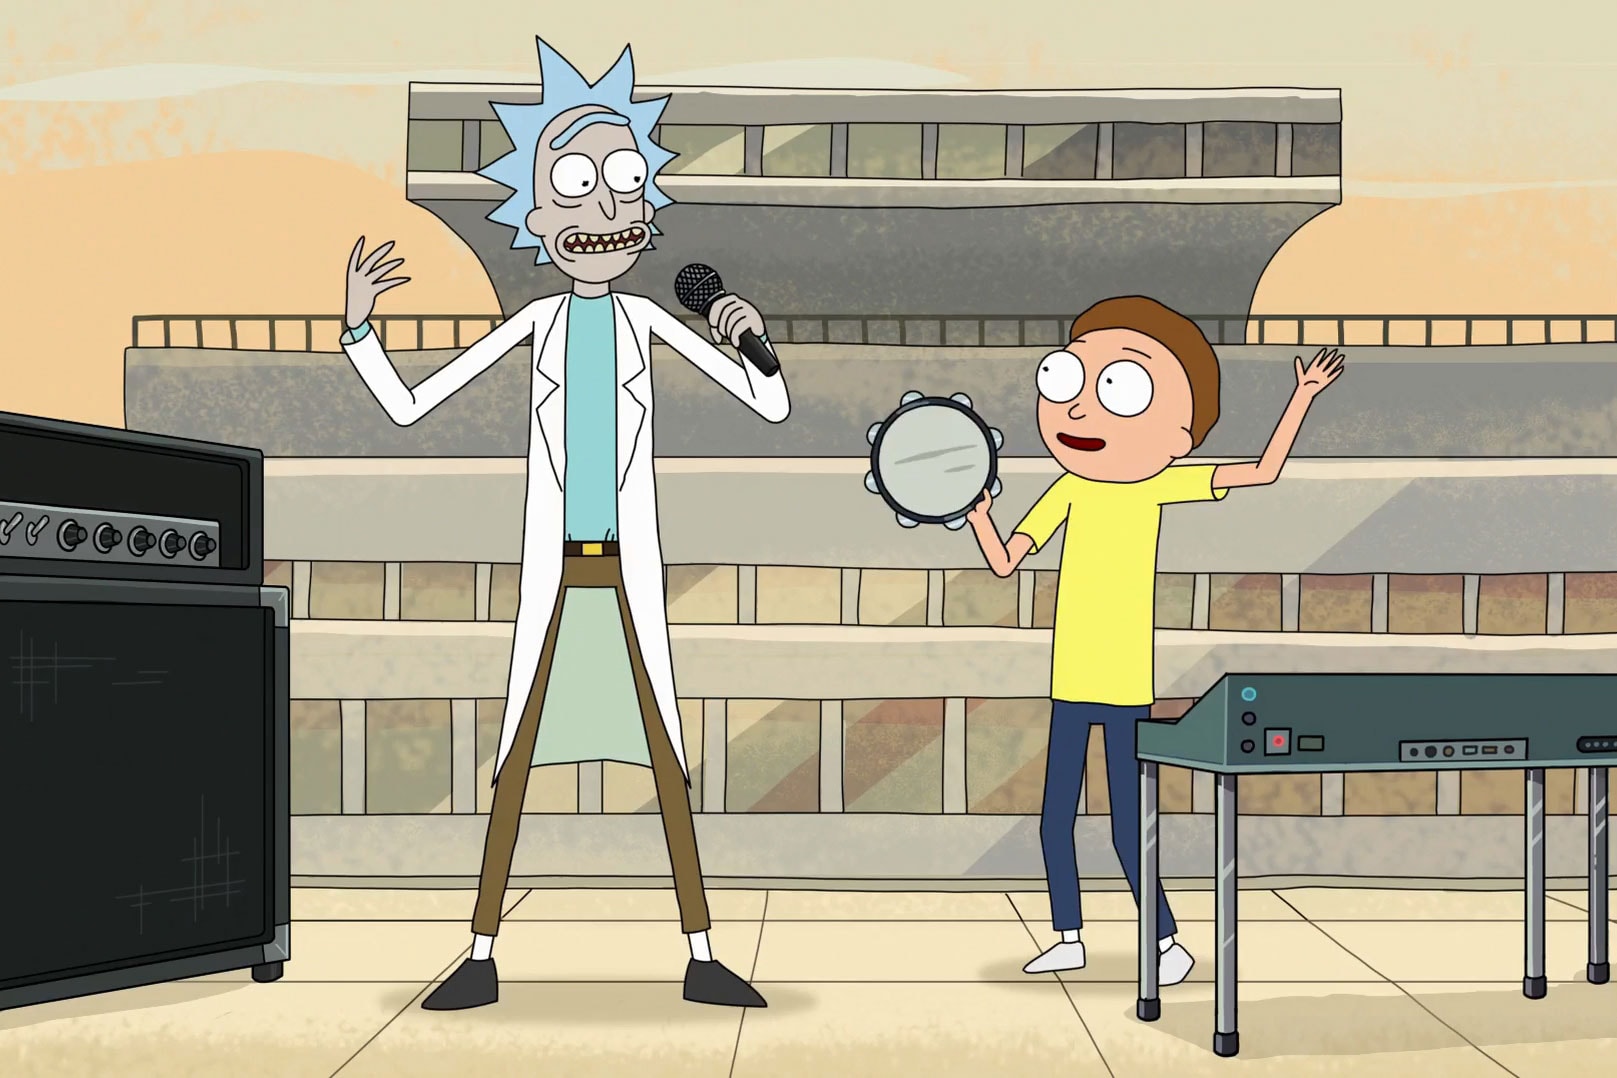 'Rick and Morty' Character Contest charity autism background drawing prizes Justin Roiland and Dan Harmon